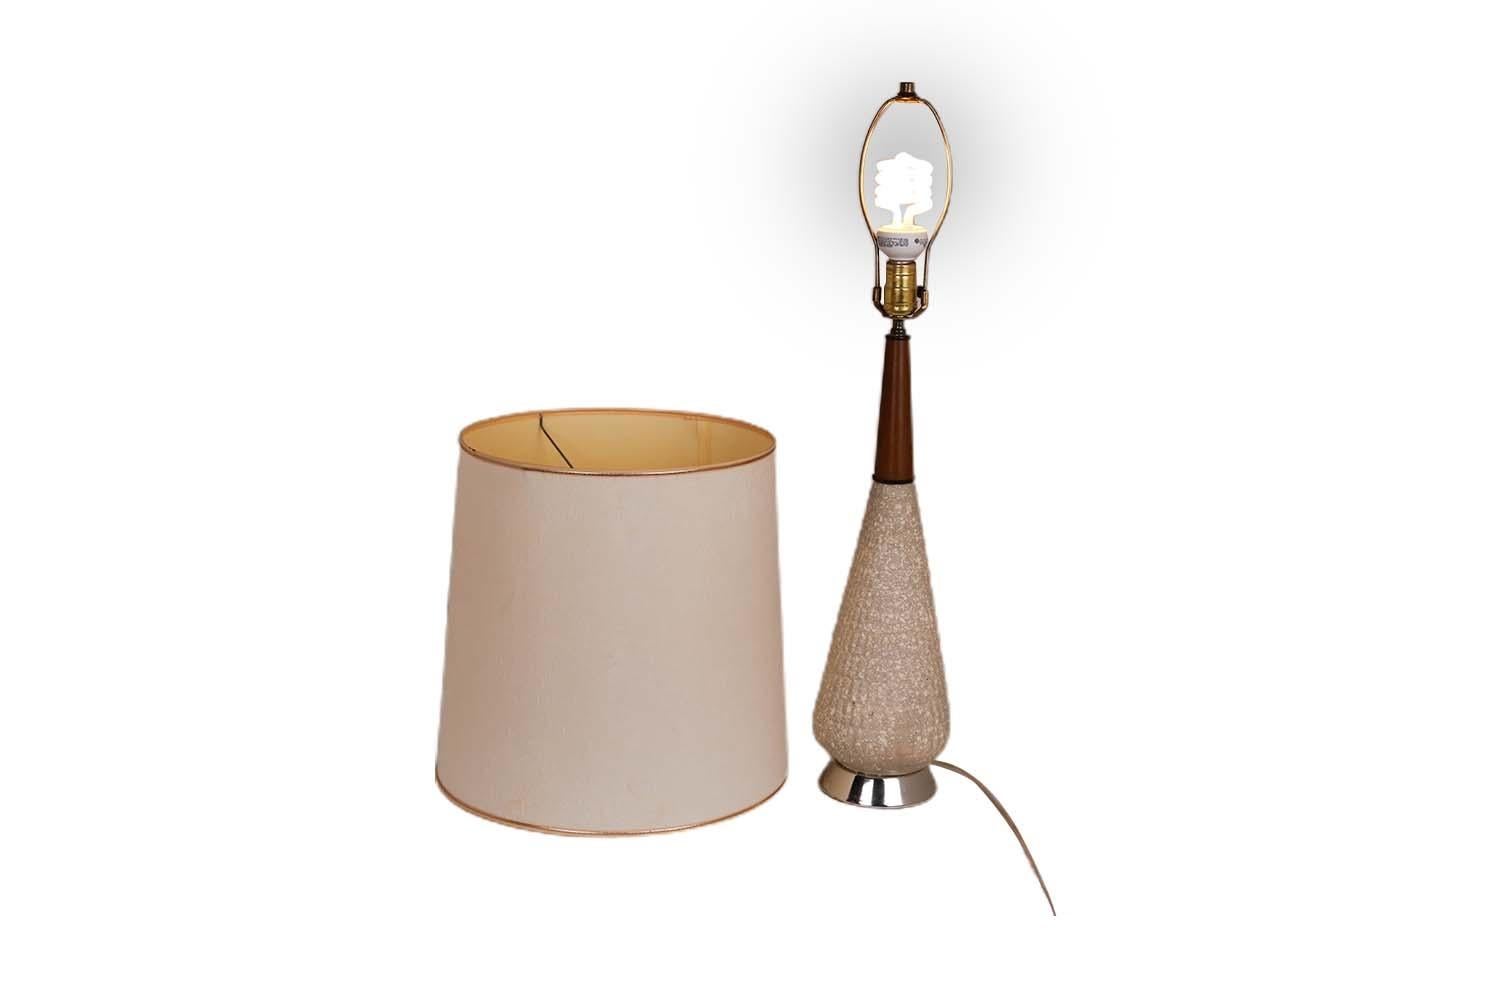 Mid-century modern atomic plaster and walnut table lamp with original shade, circa 1960s. Features a teardrop-form textured bisque base with ivory flecks with a tall walnut neck above a gold-tone metal base. The original tall drum shade has gold